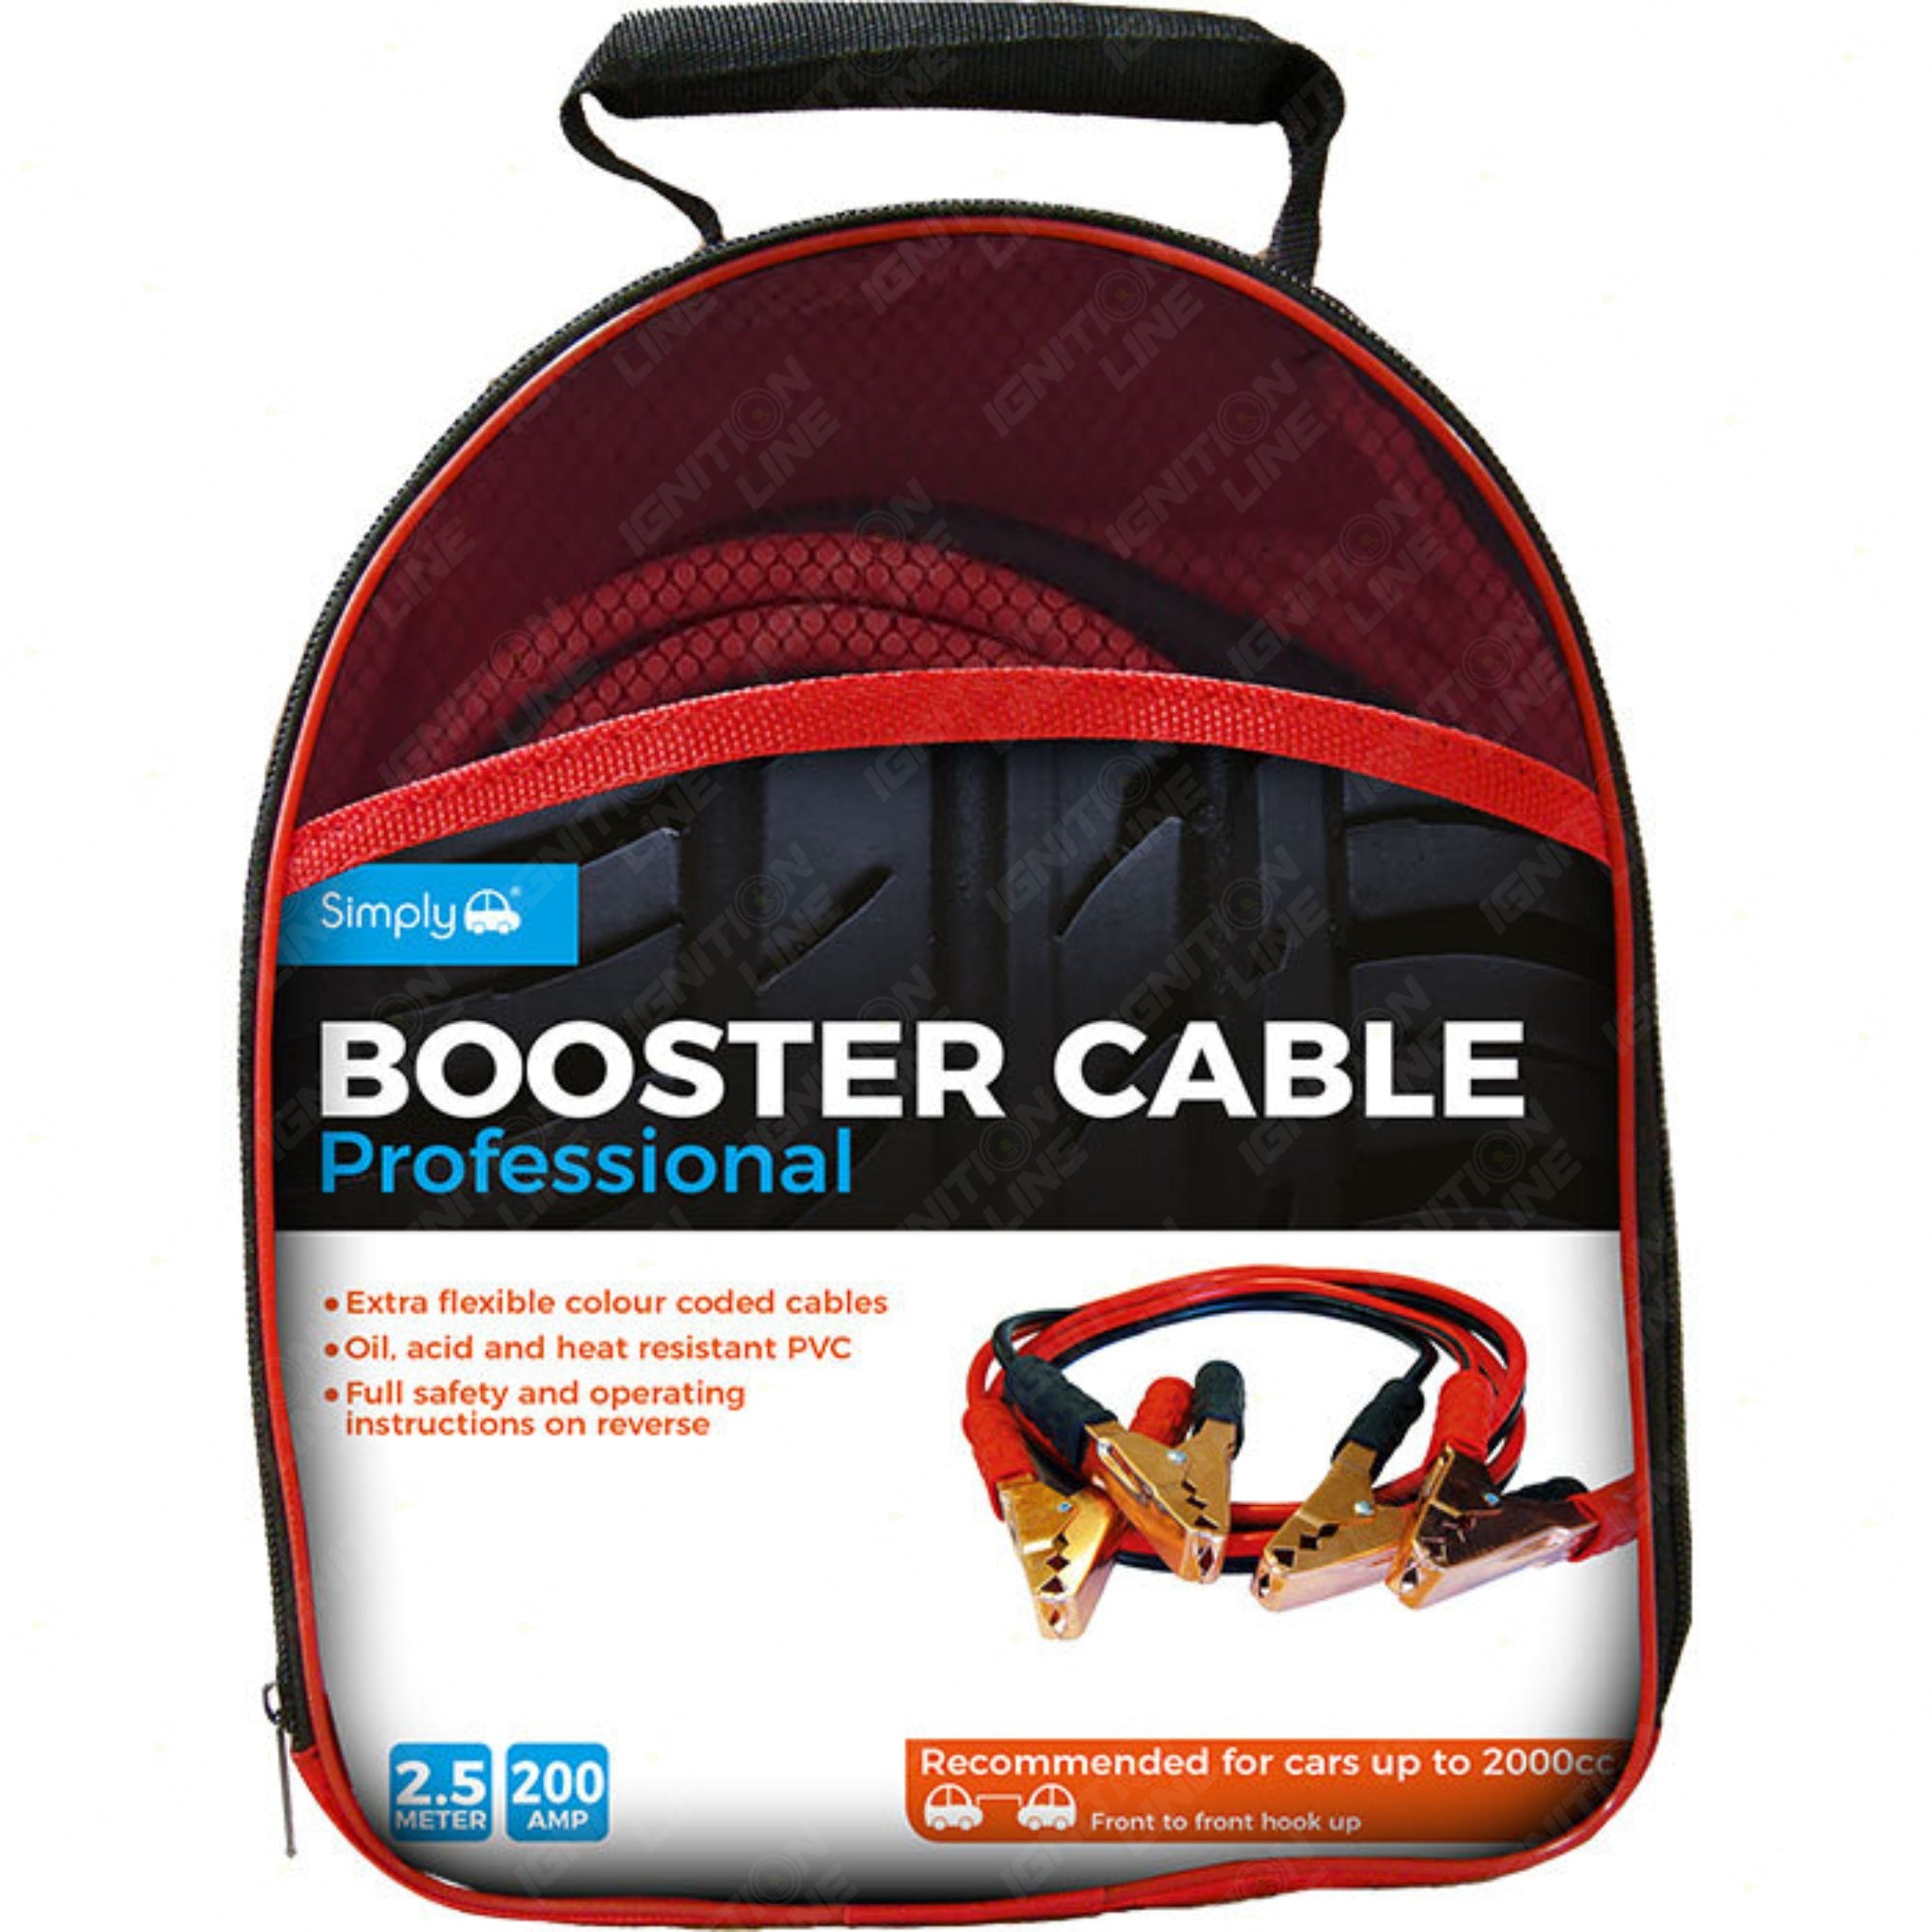 Simply Booster Cable Pro 2.5M 200Amp